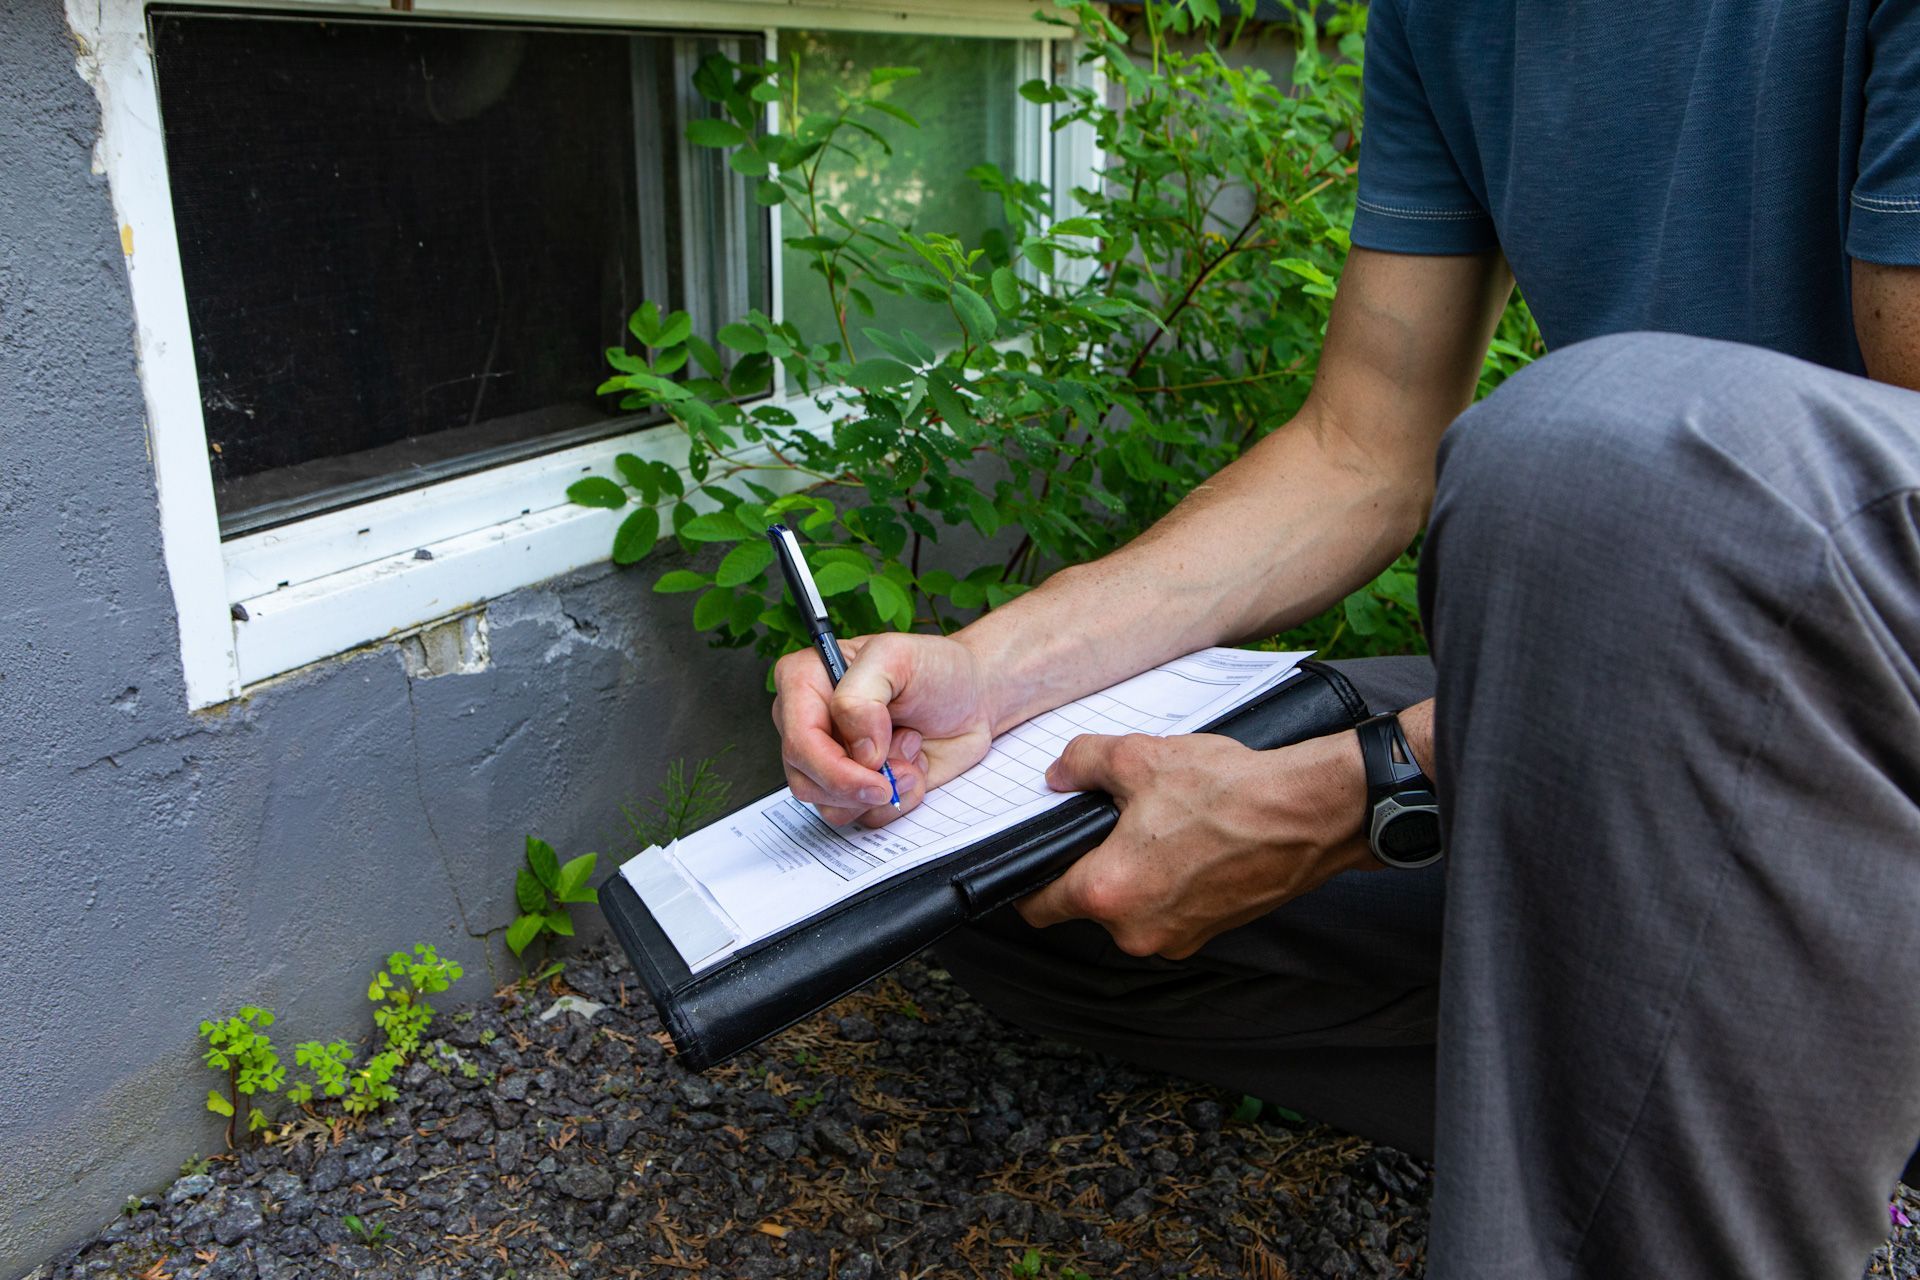 A man is writing on a clipboard in front of a window